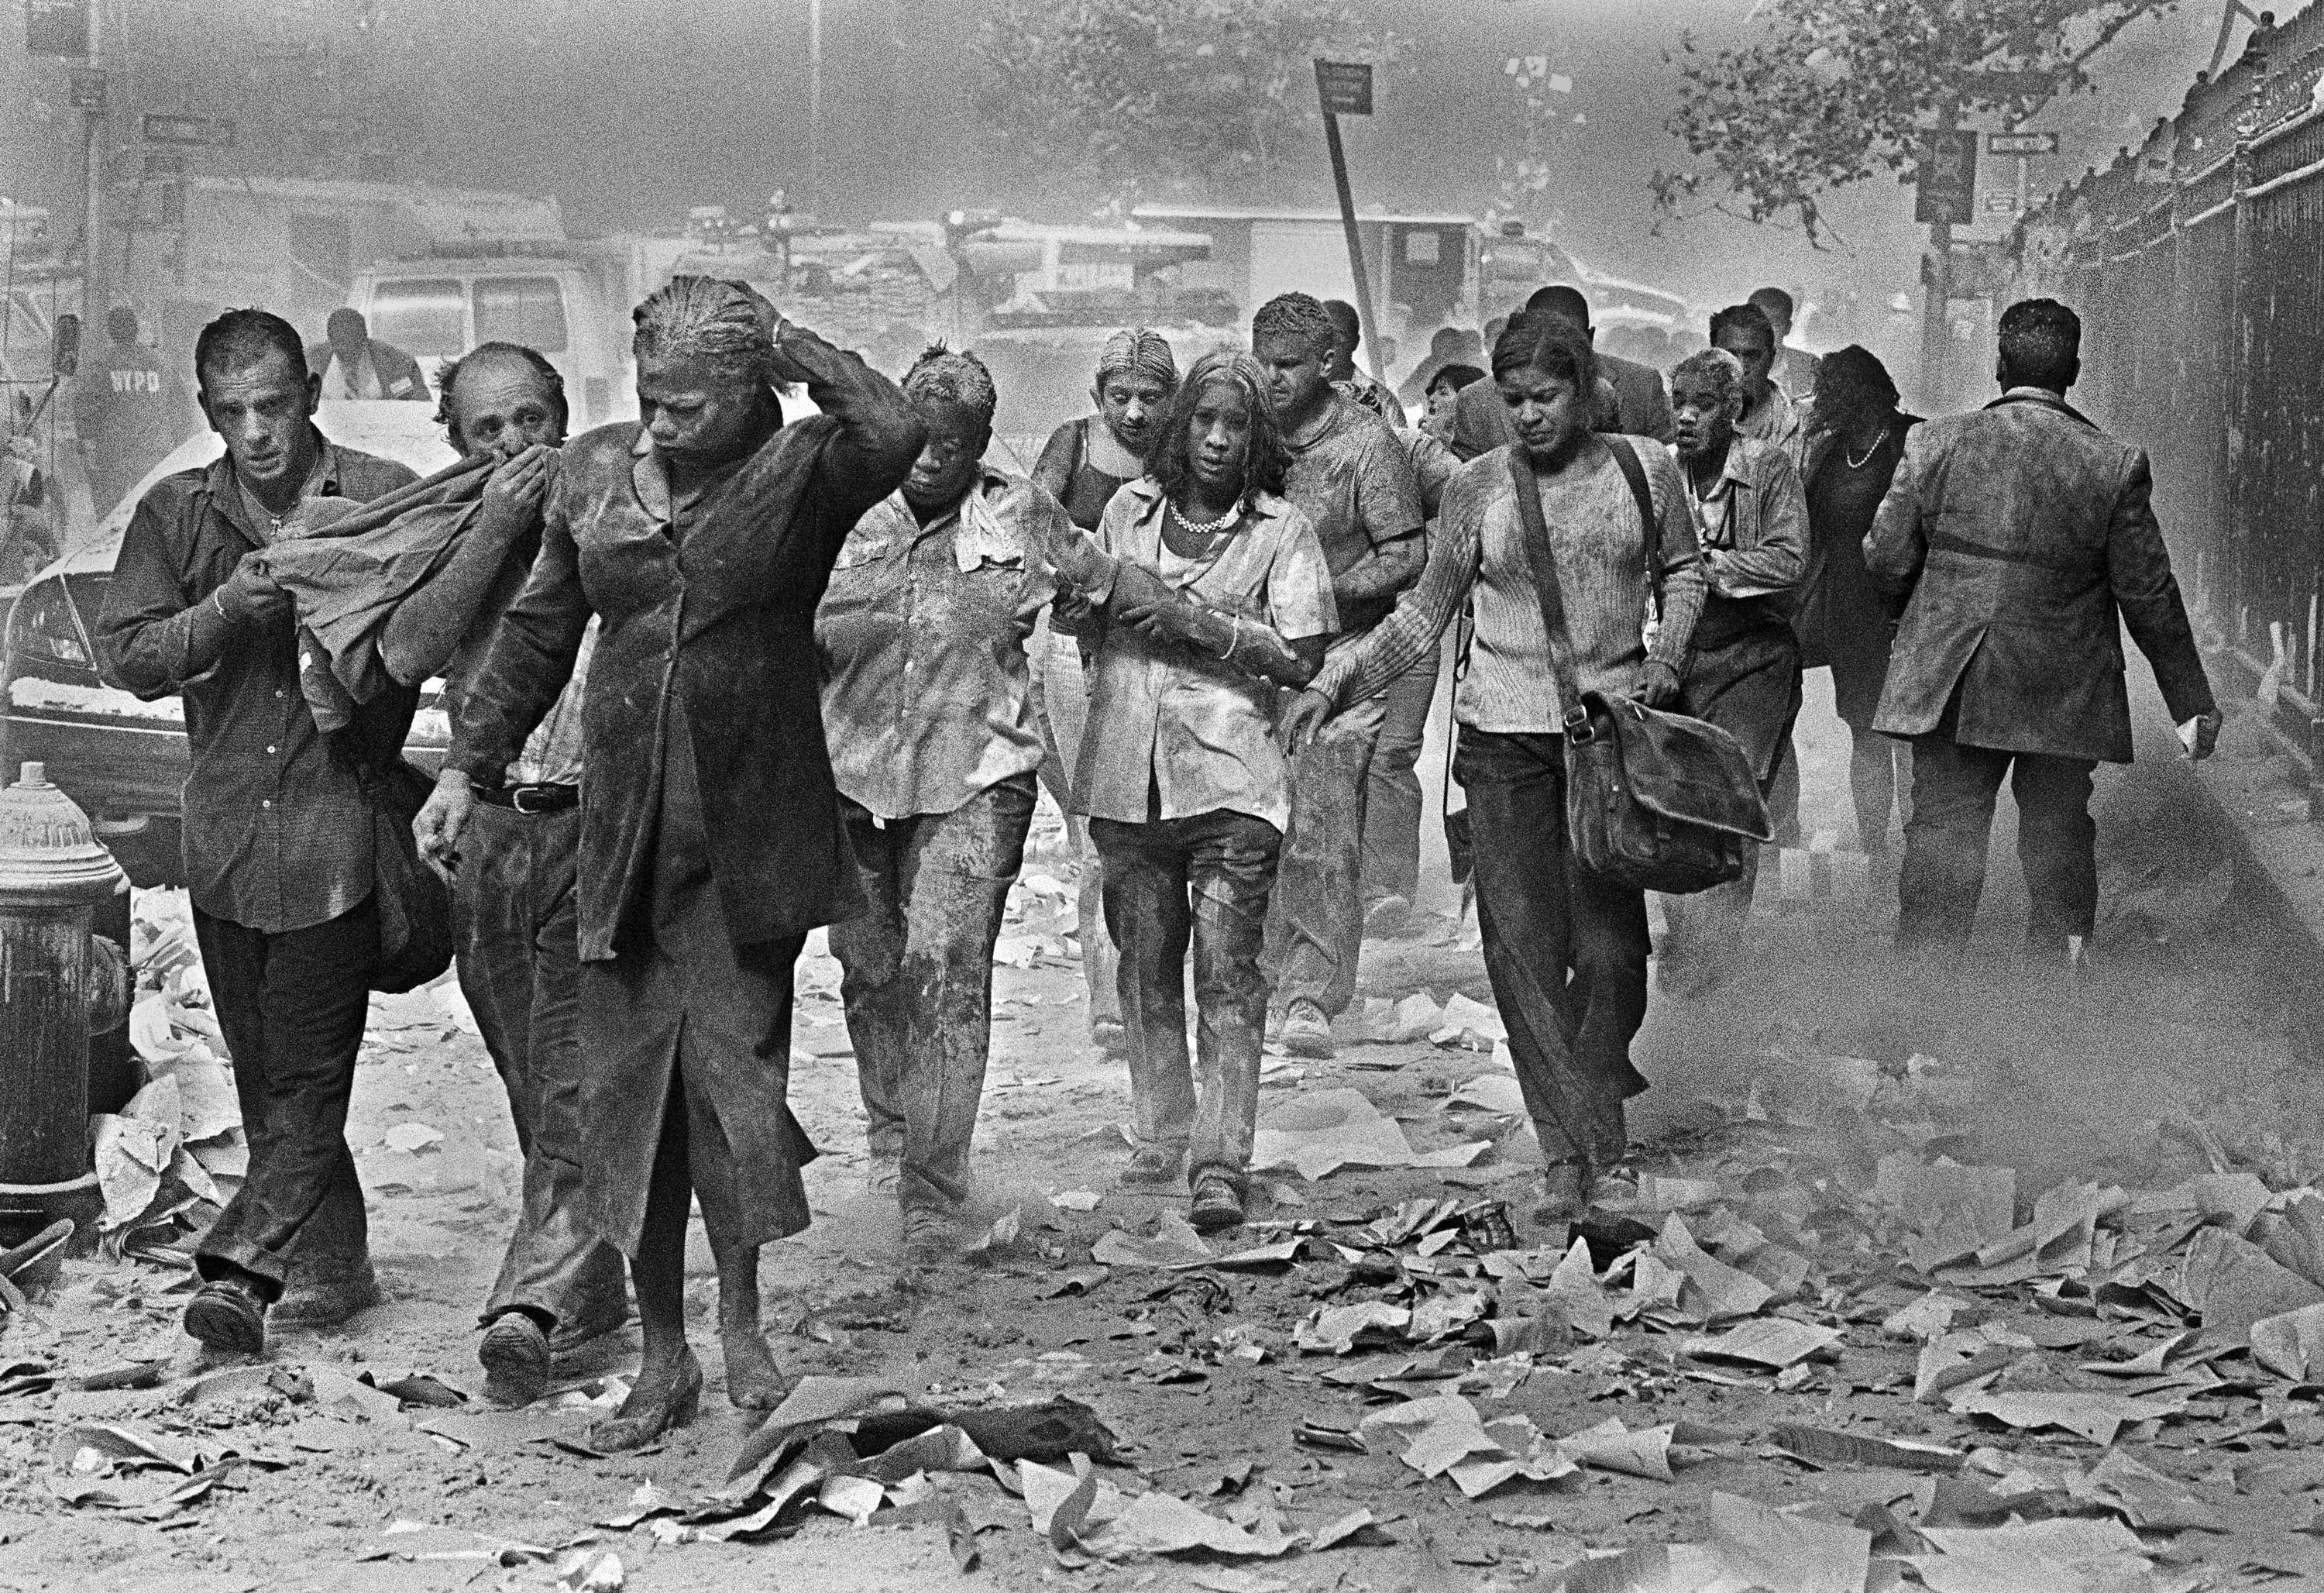 Survivors of the September 11 attacks make their way through smoke, dust, and debris.